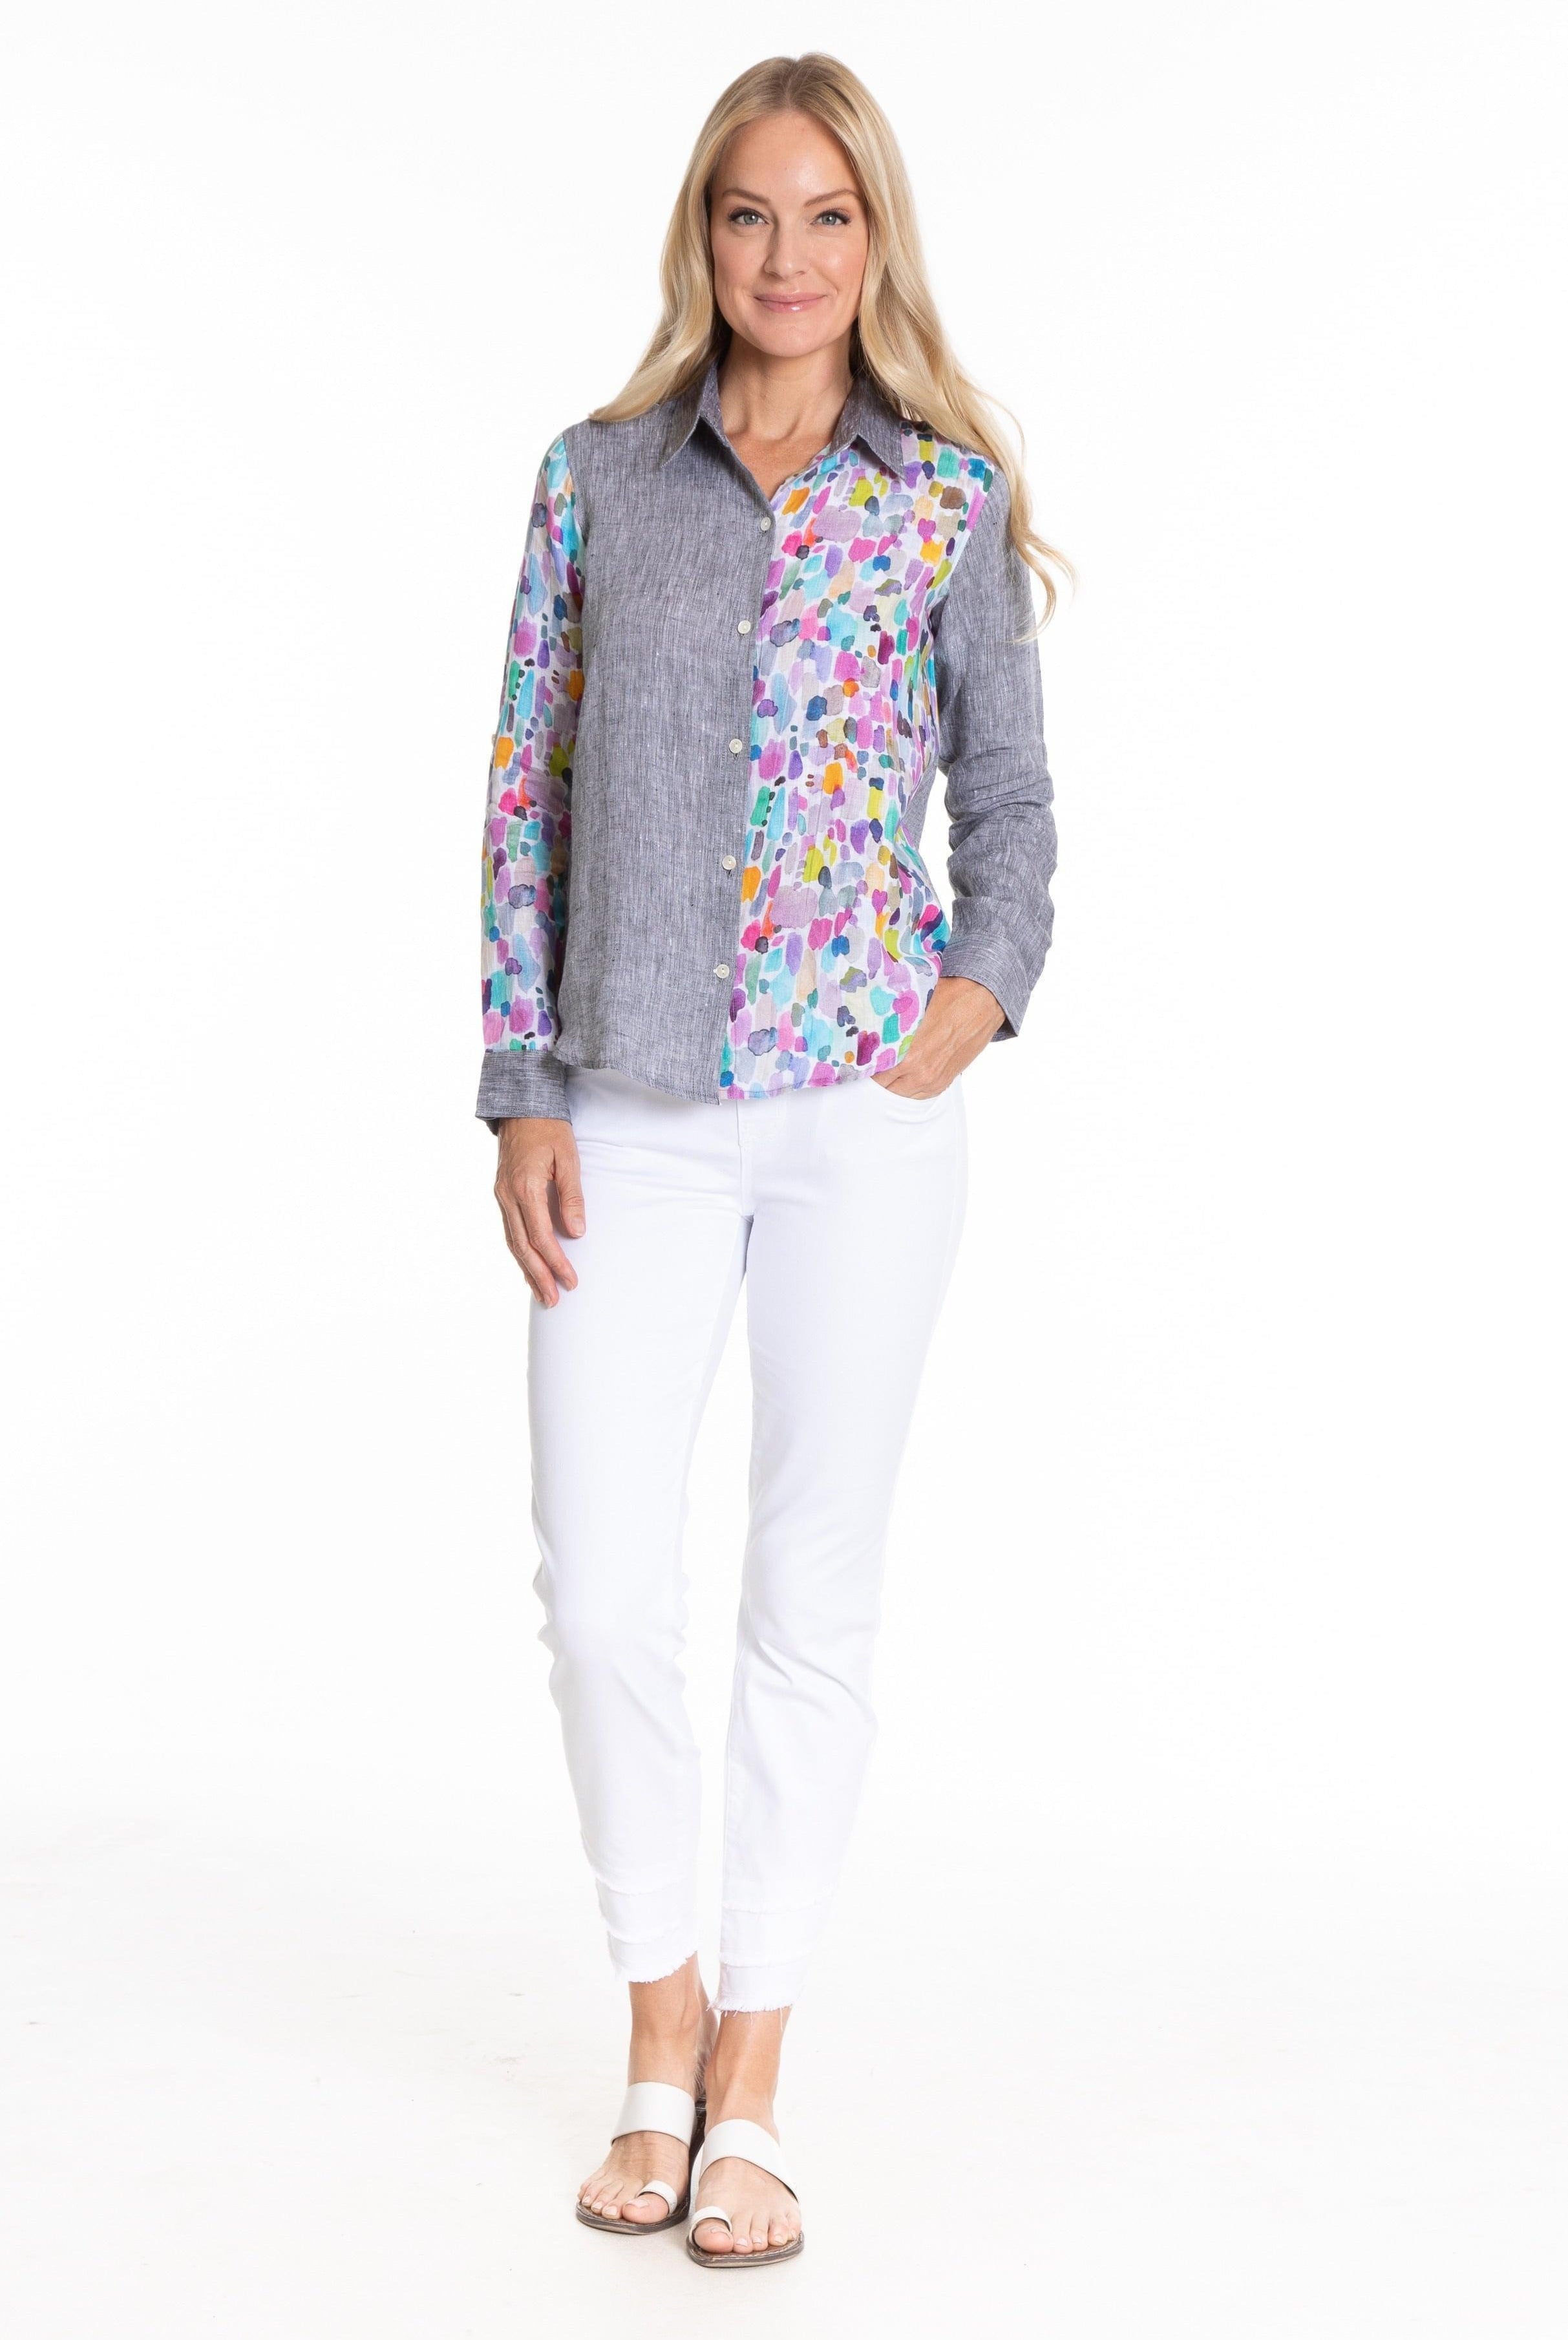 Button-up Top with Roll up Tab Sleeve/ Mix Media Pocket APNY